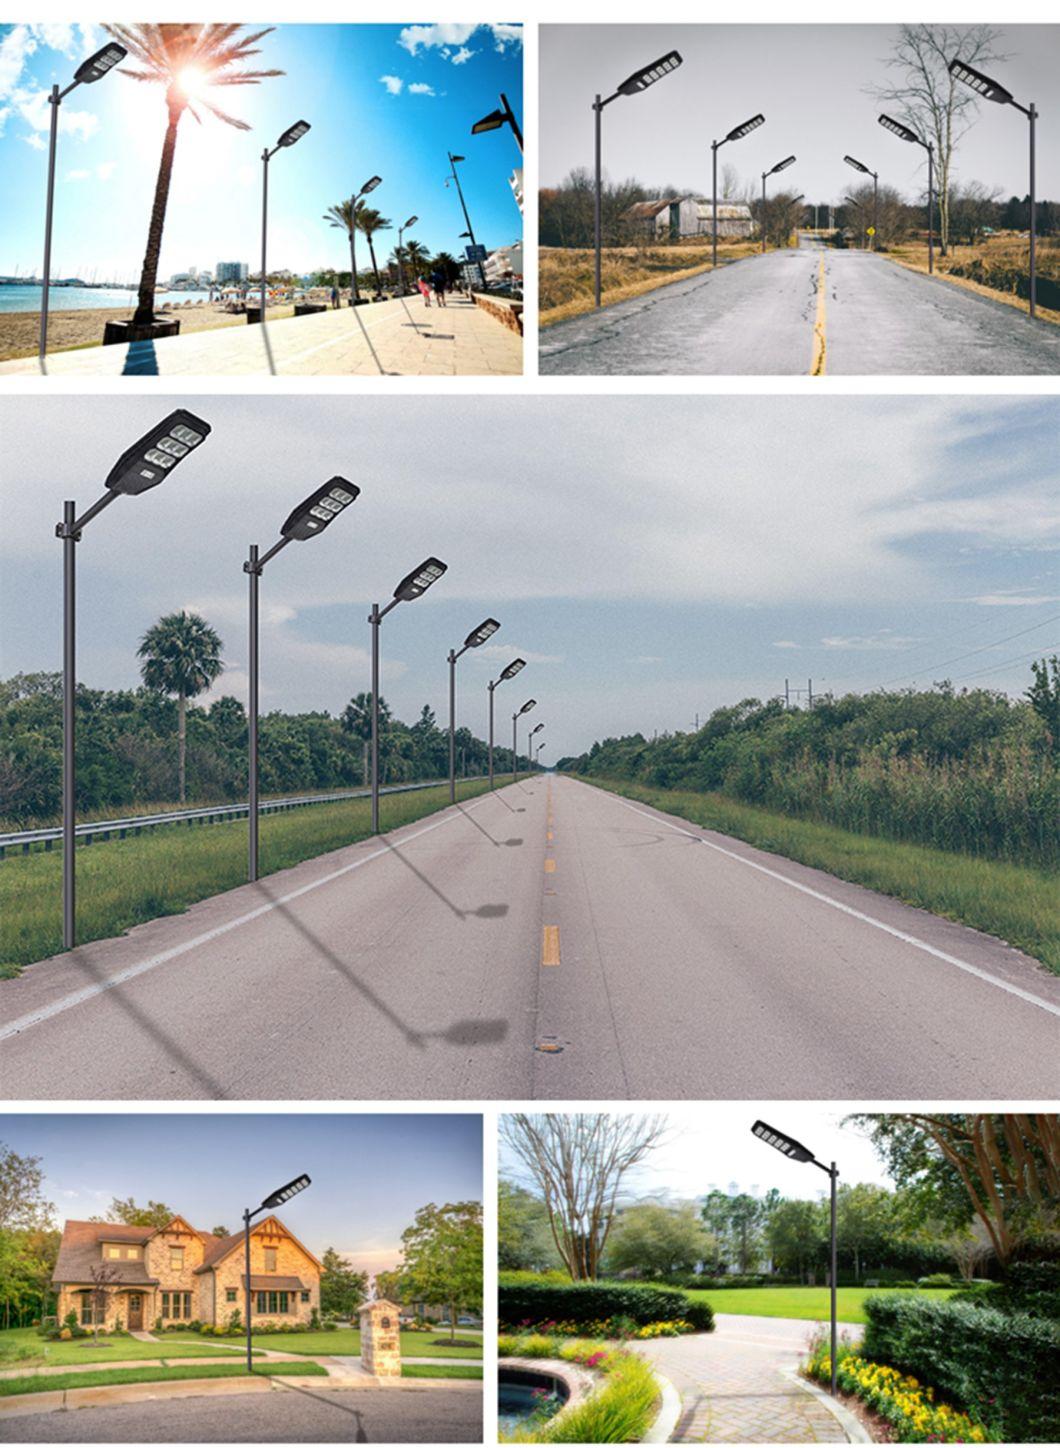 Low Price China Stand Alone LED Solar Street Light All in One Lamp